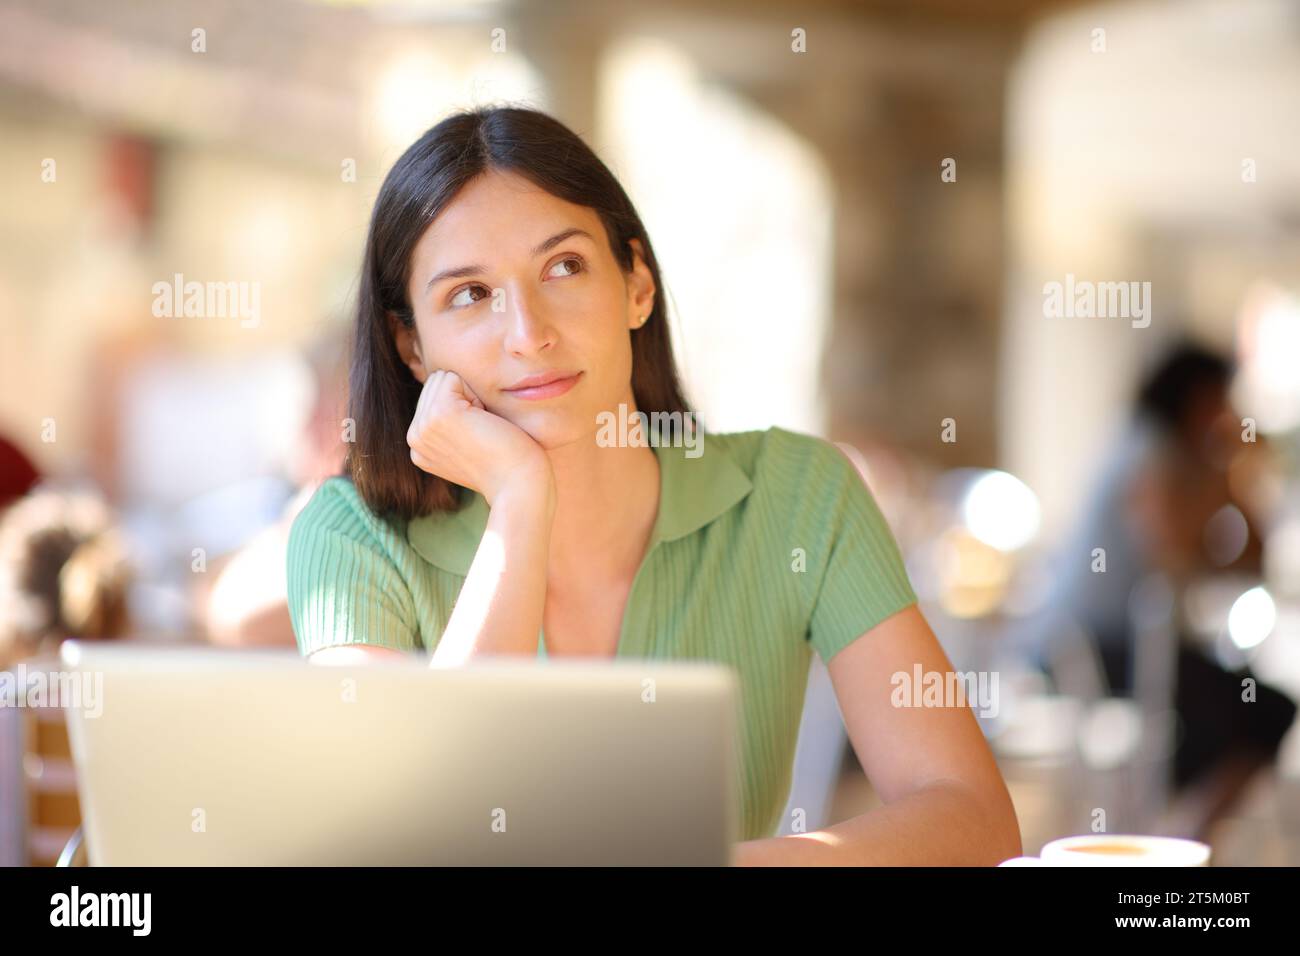 Front view portrait of a serious woman with laptop thinking looking at side in a bar terrace Stock Photo